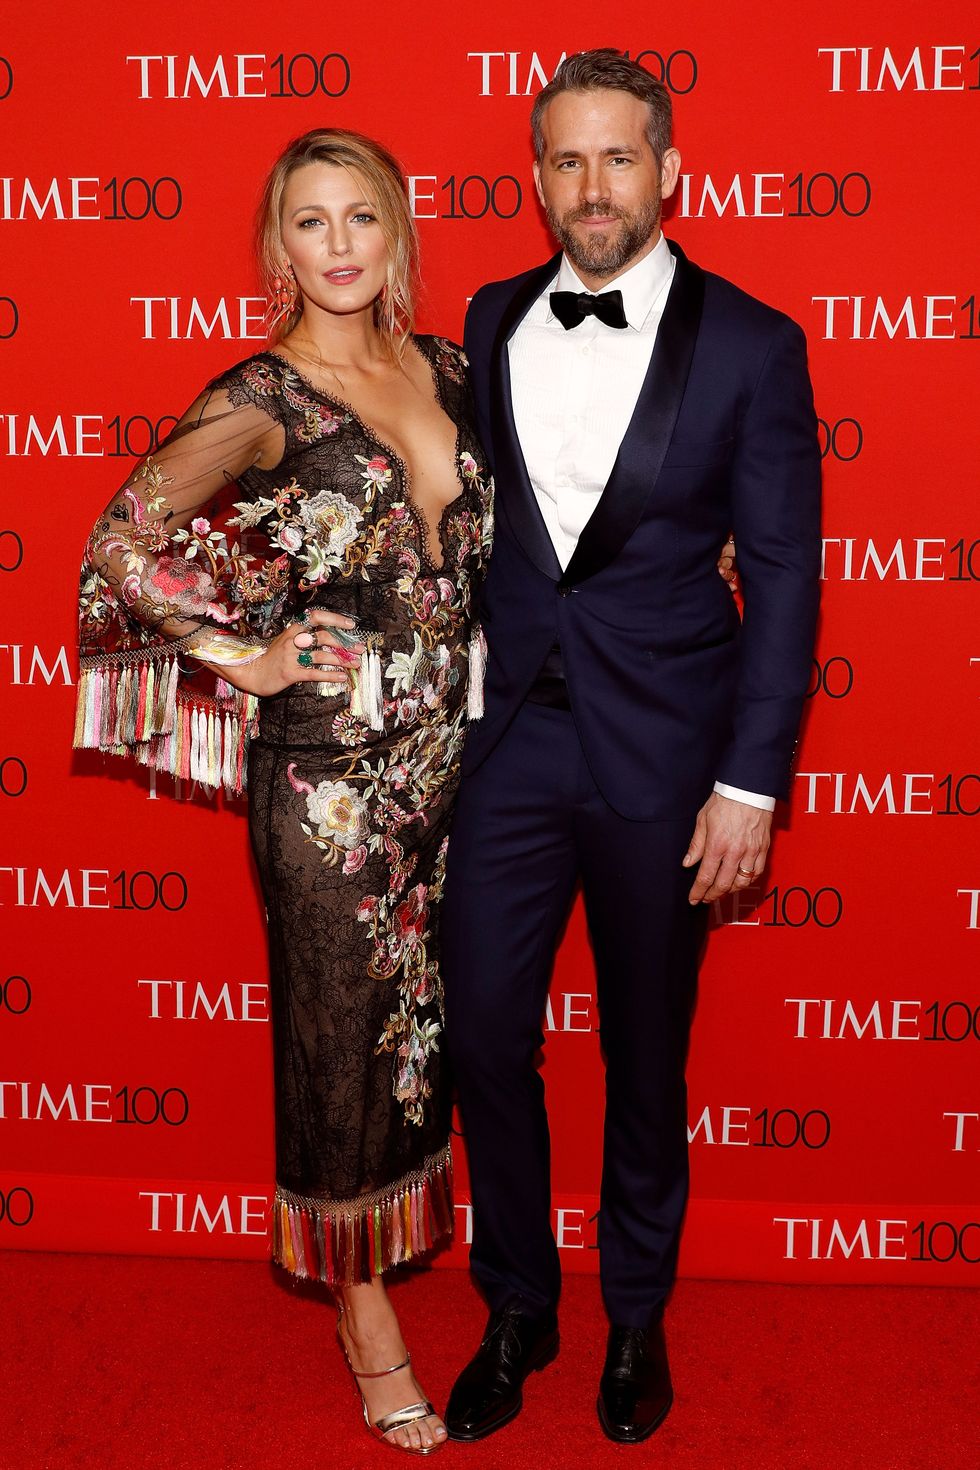 Blake Lively and Ryan Reynolds at Time 100